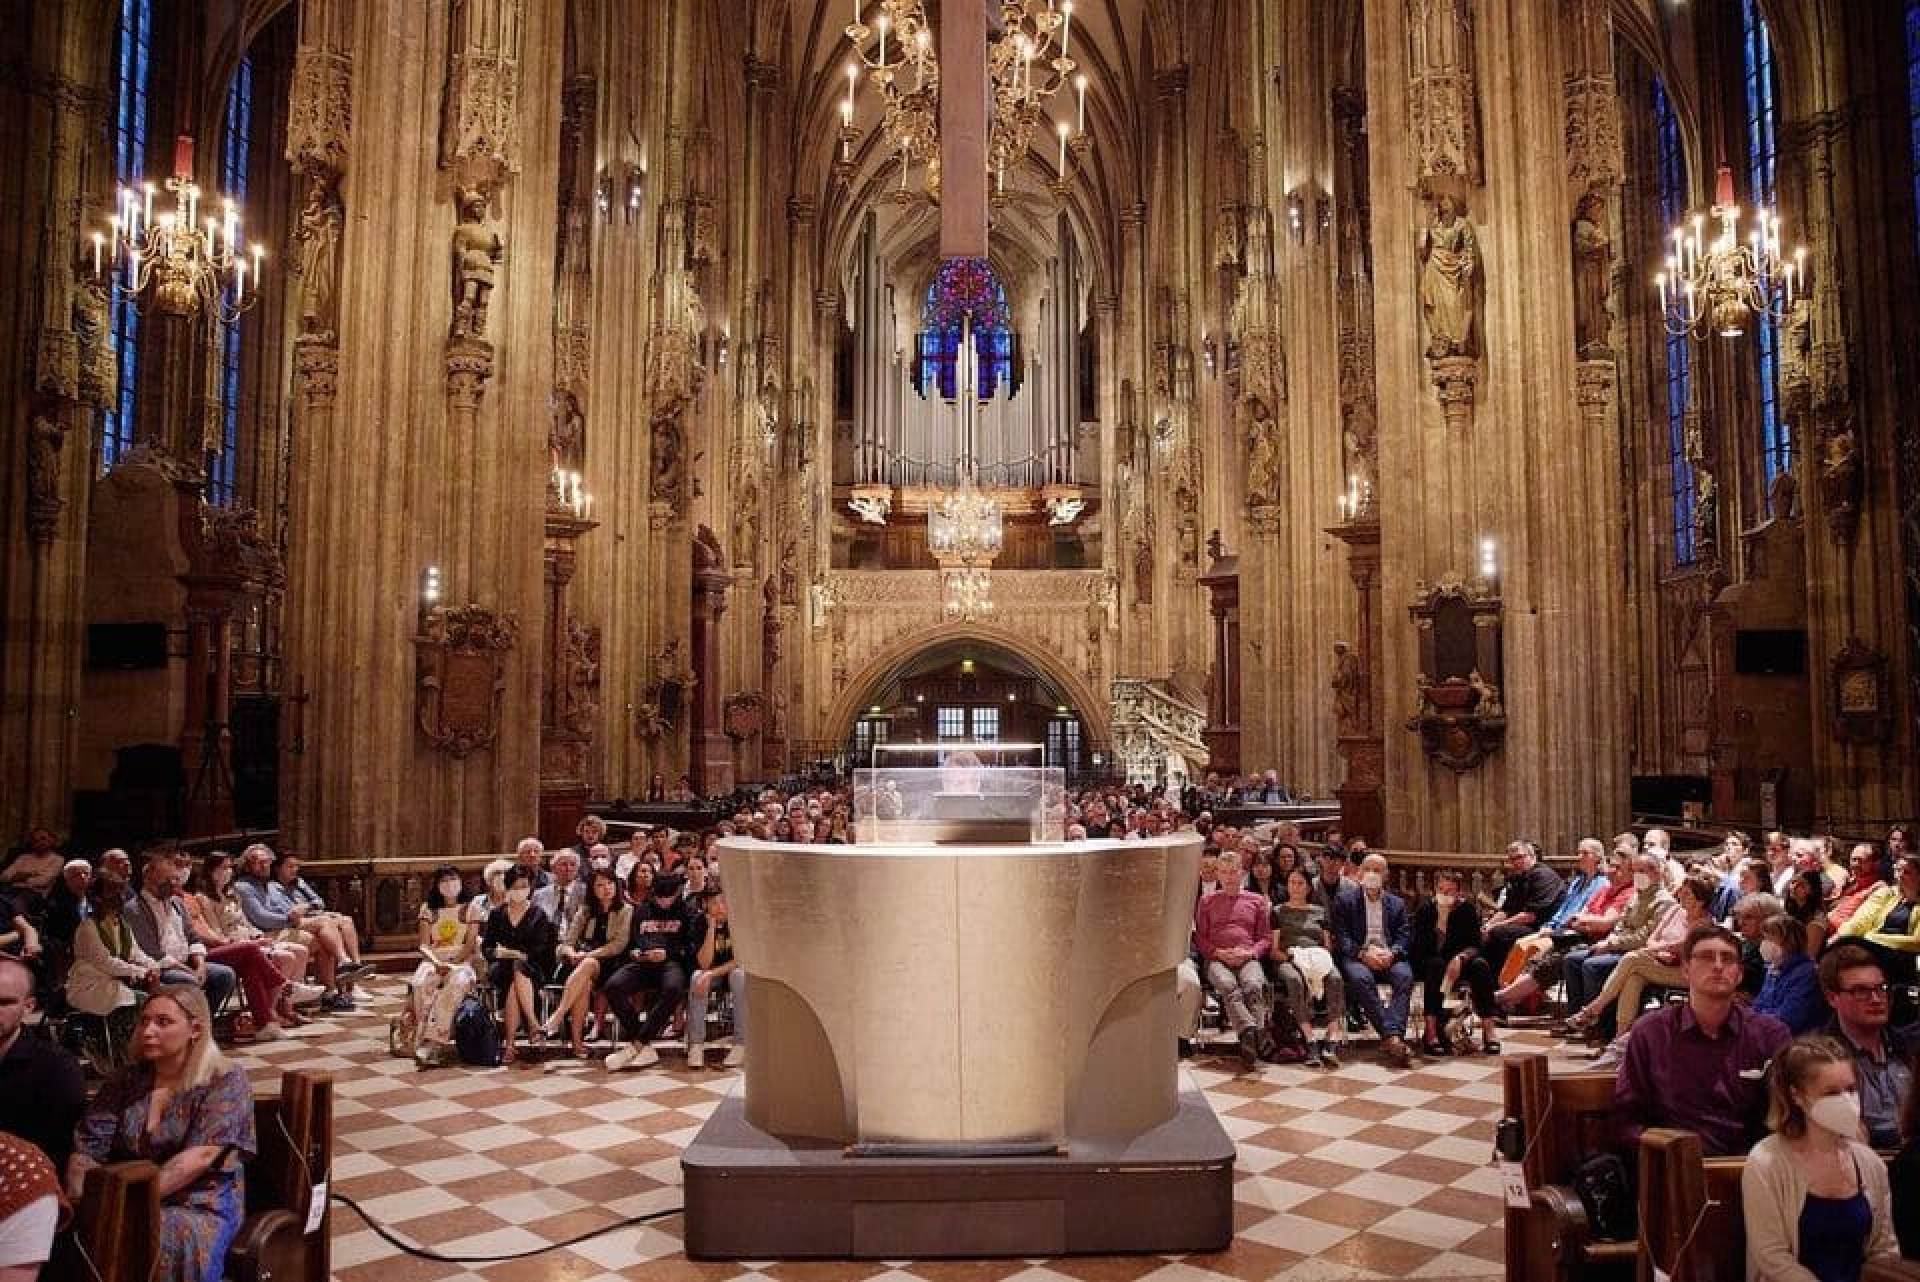 Giant Organ Concerts